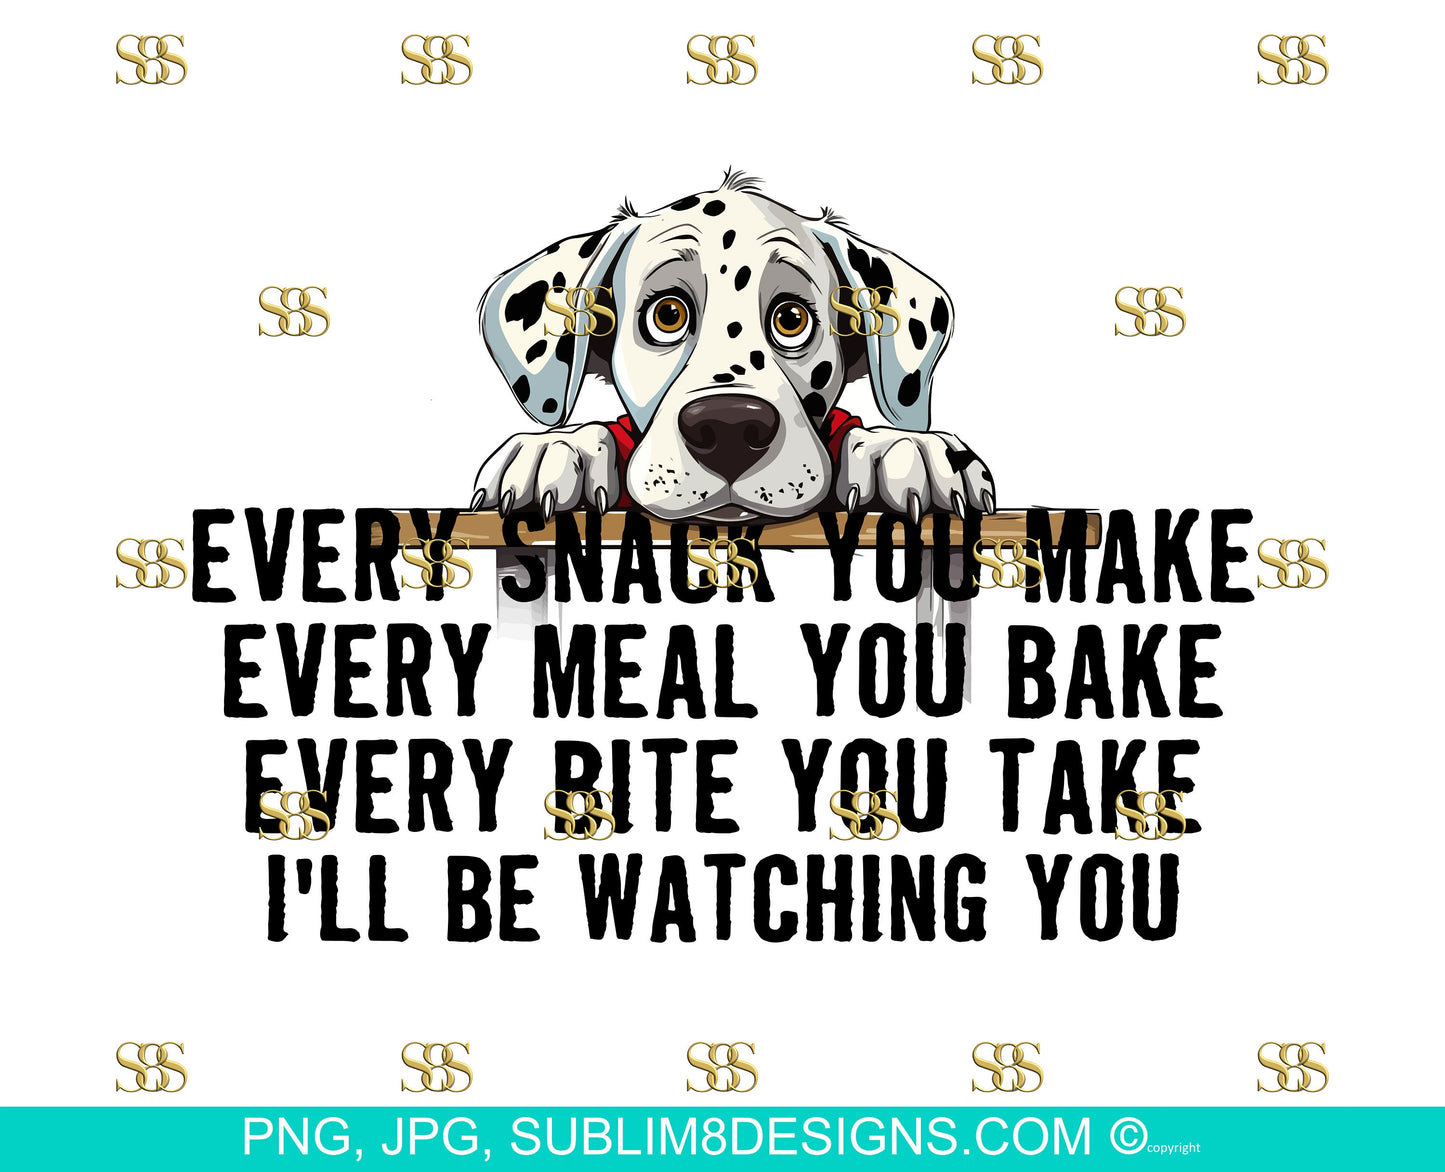 Snack-Obsessed Dalmatian: The Hilarious Table Peeker! Every Bite You Take I'll Be Watching You PNG and JPEG ONLY